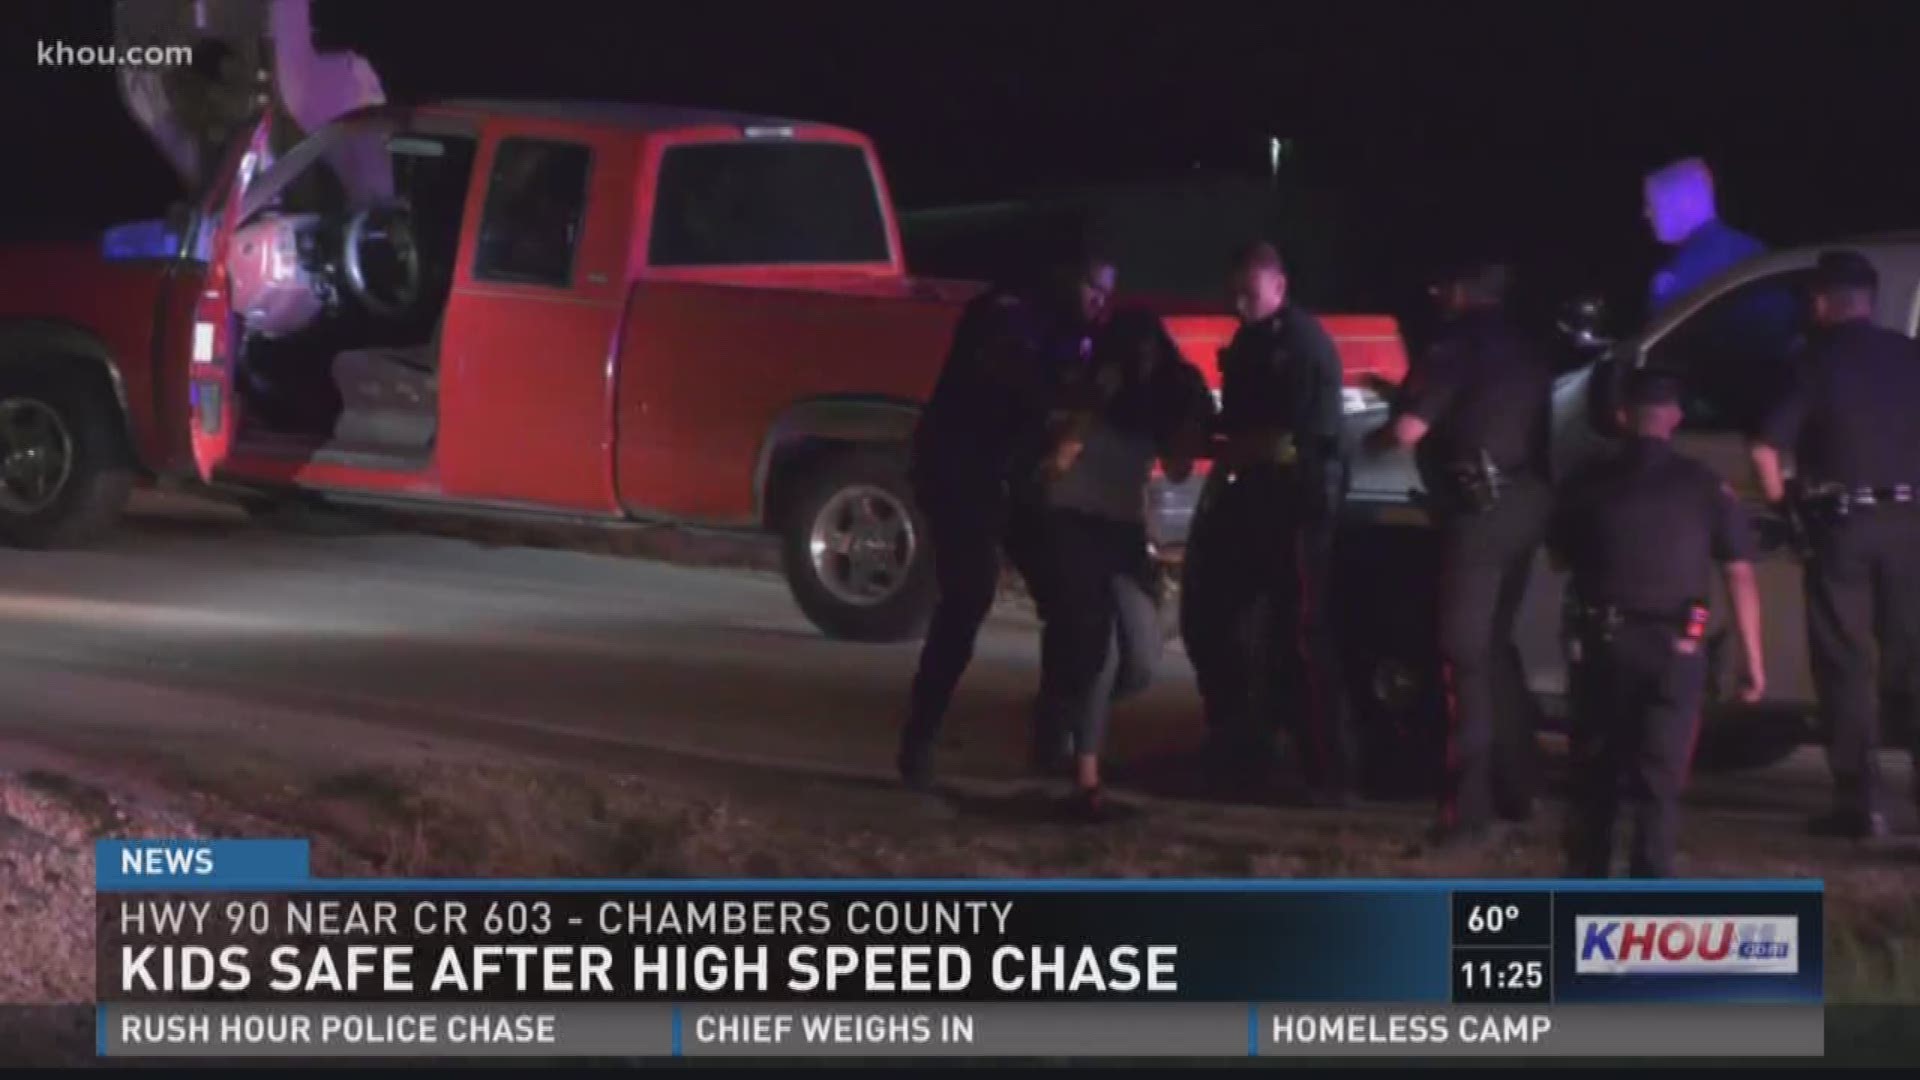 The driver of a pickup truck was arrested Thursday night for allegedly leading police on a high-speed chase with two children in the backseat.